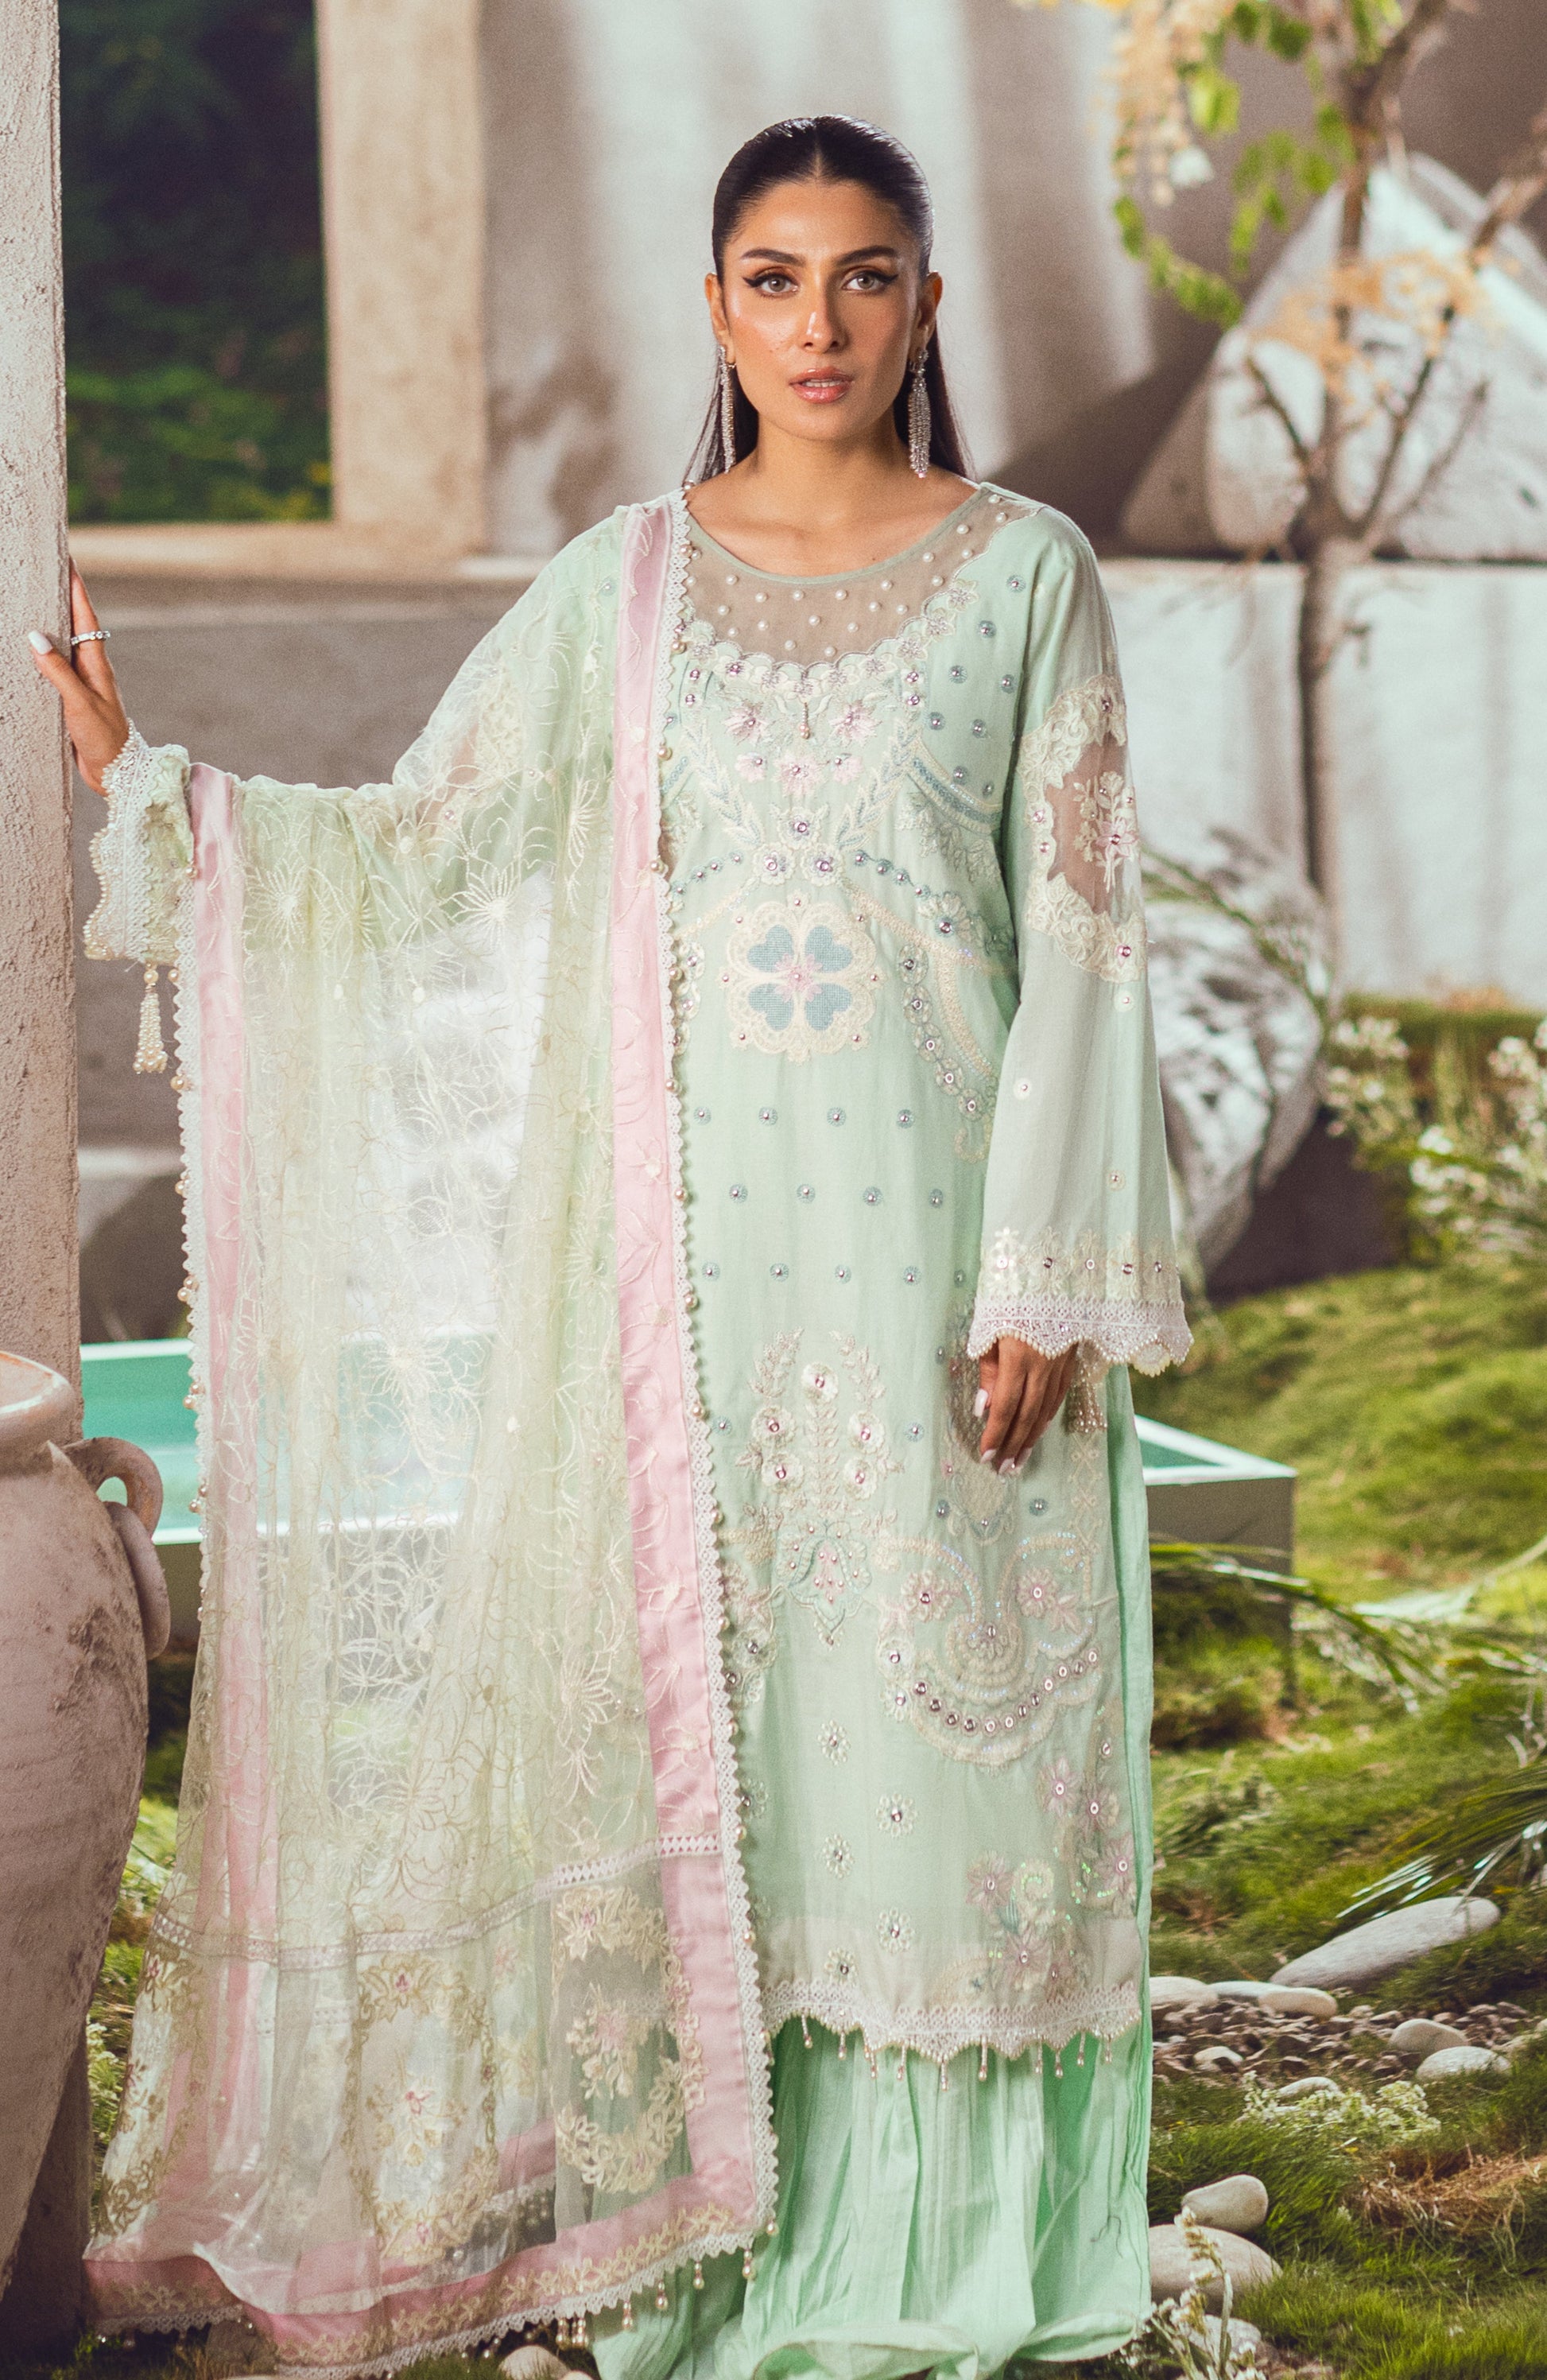 Buy Now, D#04 MAHIYMAAN - Eid Luxury Embroidered Lawn - Al Zohaib - Shahana Collection UK - Wedding and Bridal Party Dresses - Festive Eid 2023